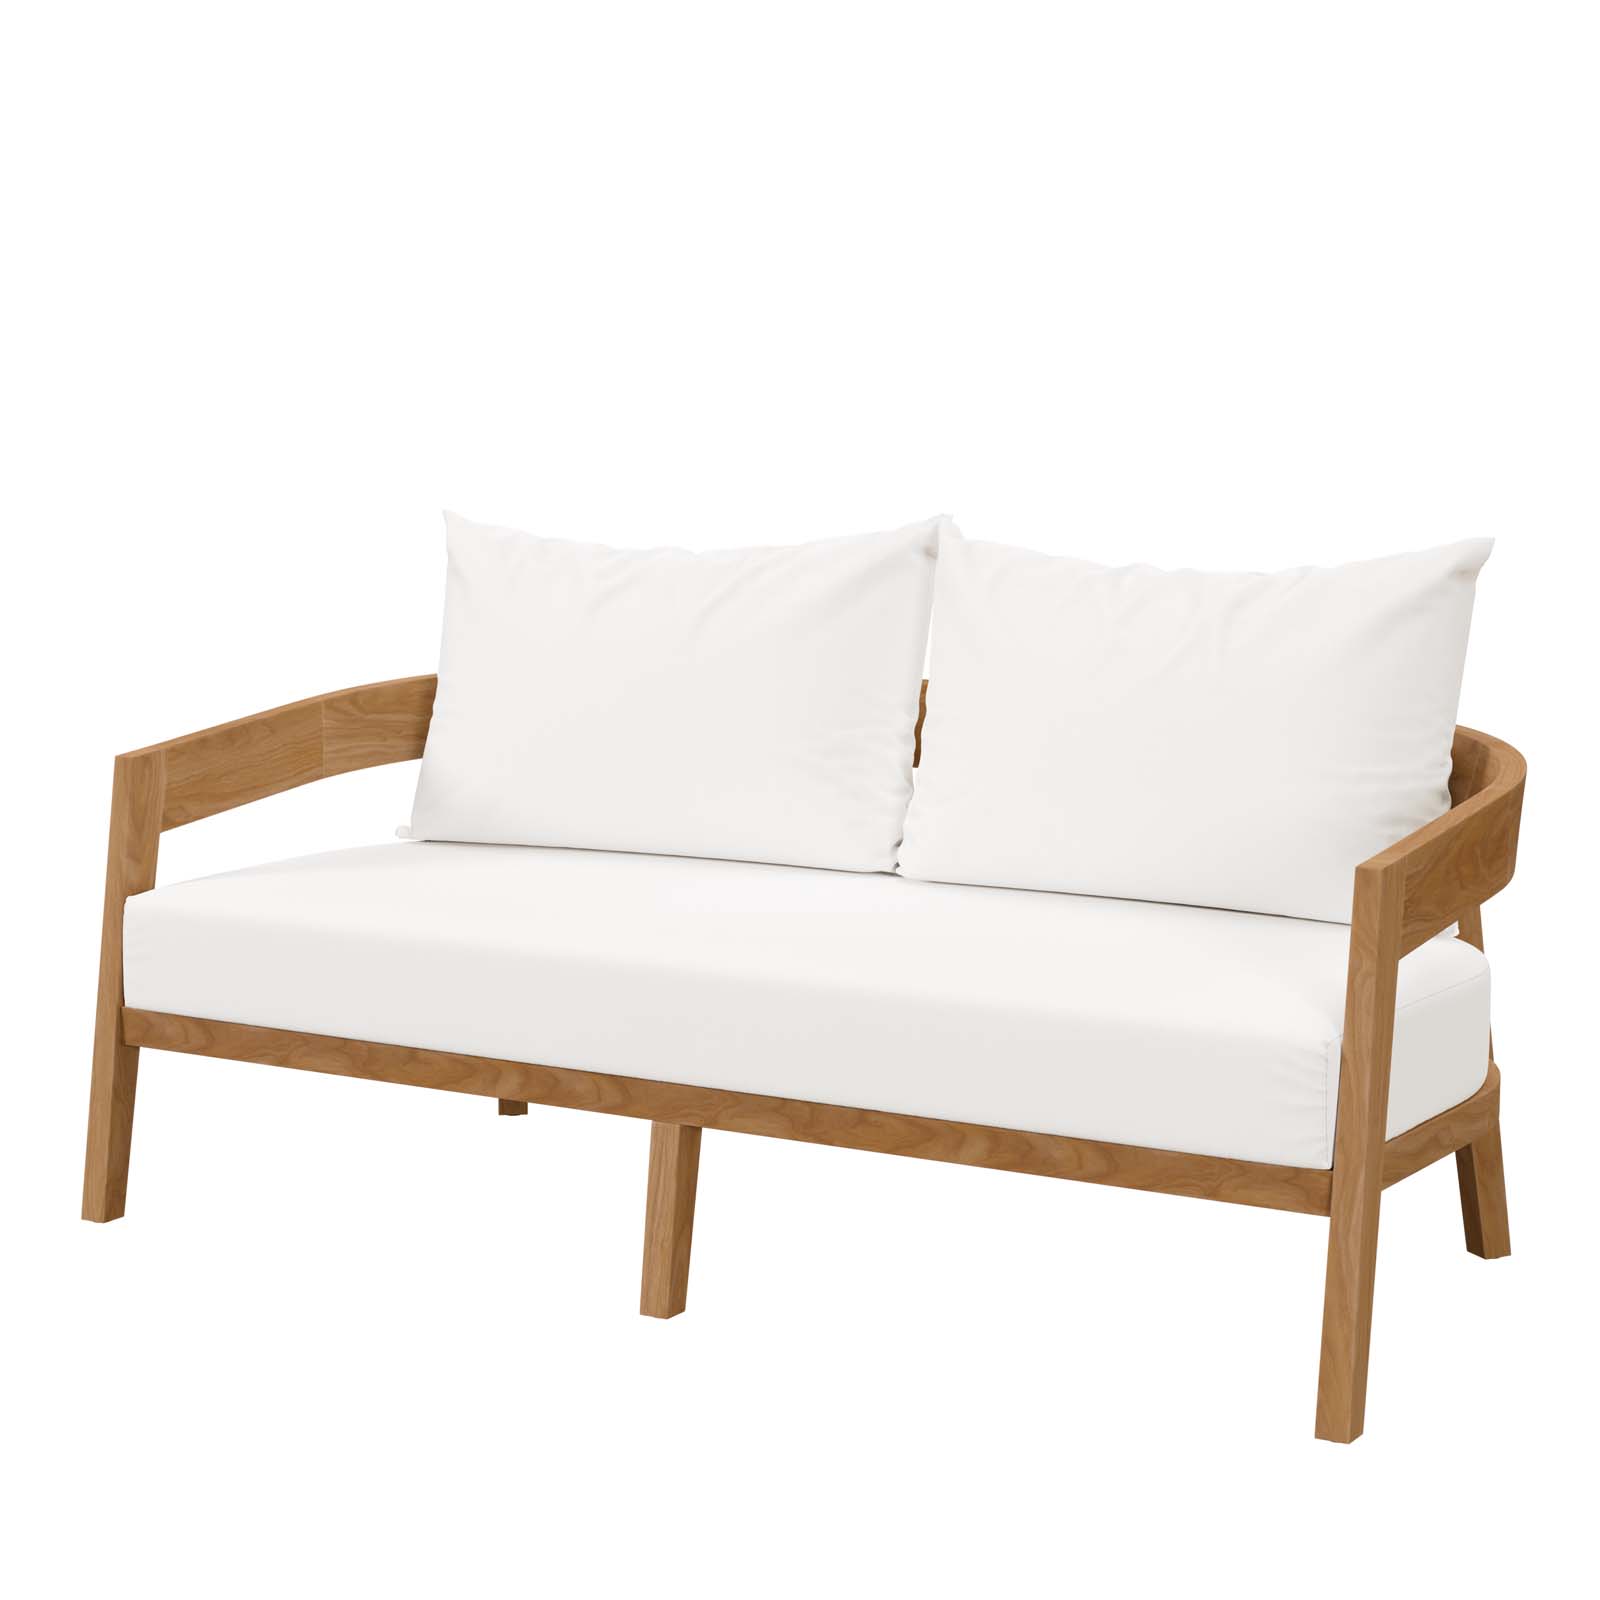 Lounge Sectional Sofa Chair Table Set, White Natural, Teak Wood, Fabric, Modern Contemporary, Outdoor Patio Balcony Cafe Bistro Garden Furniture Hotel Hospitality - image 5 of 10